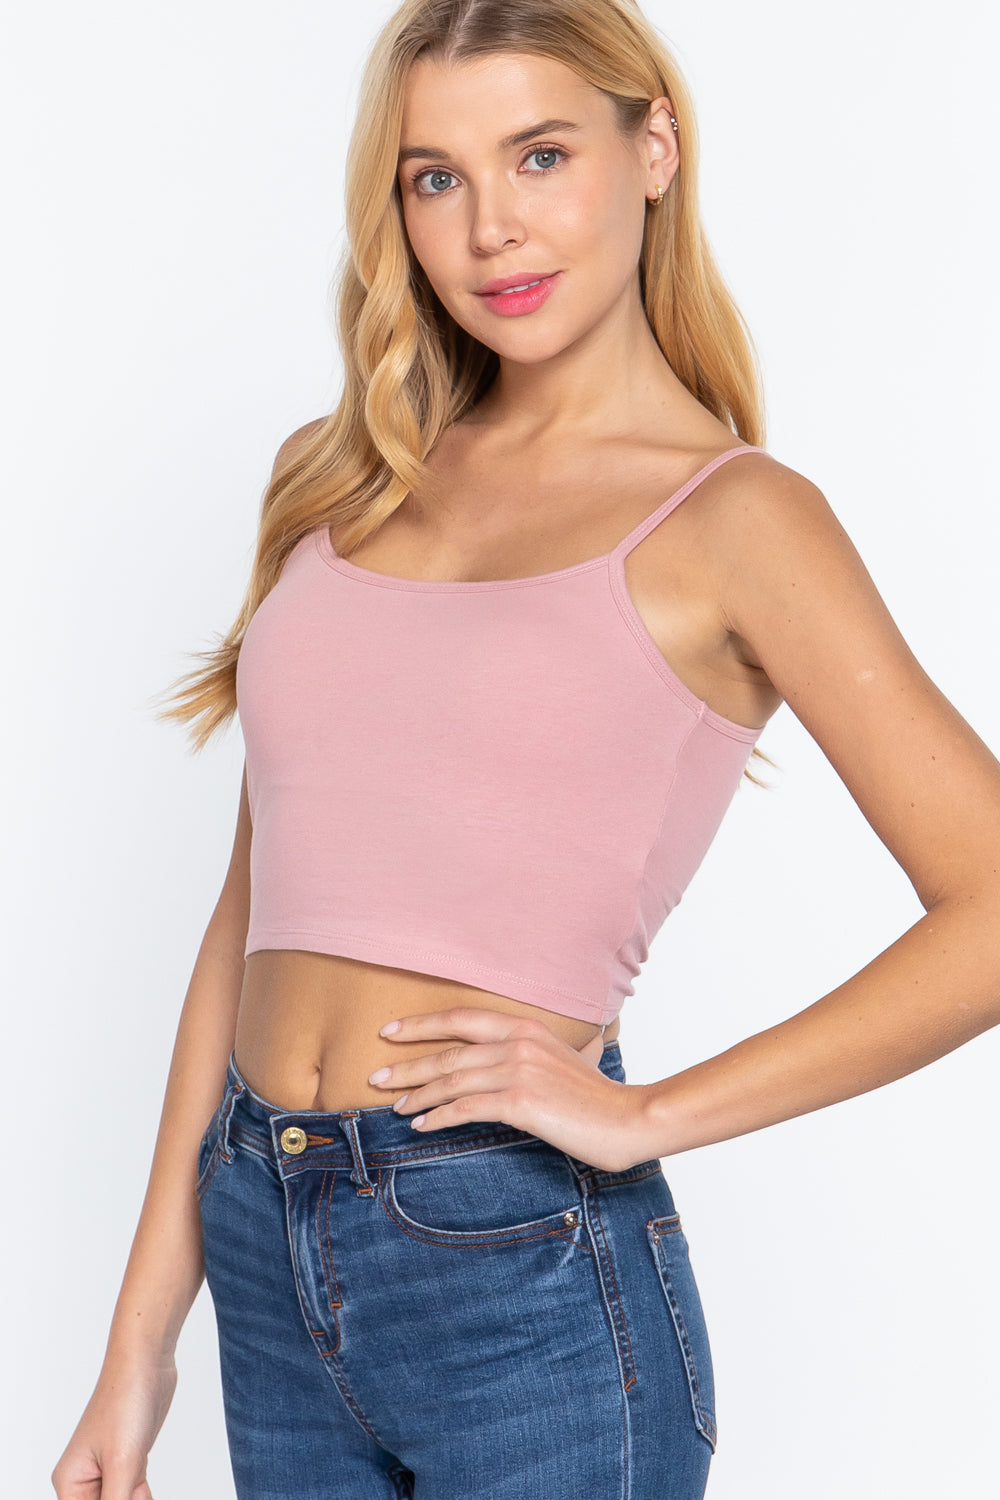 Round Neck with Removable Bra Cup Cotton Spandex Bra Top in Paint Pink